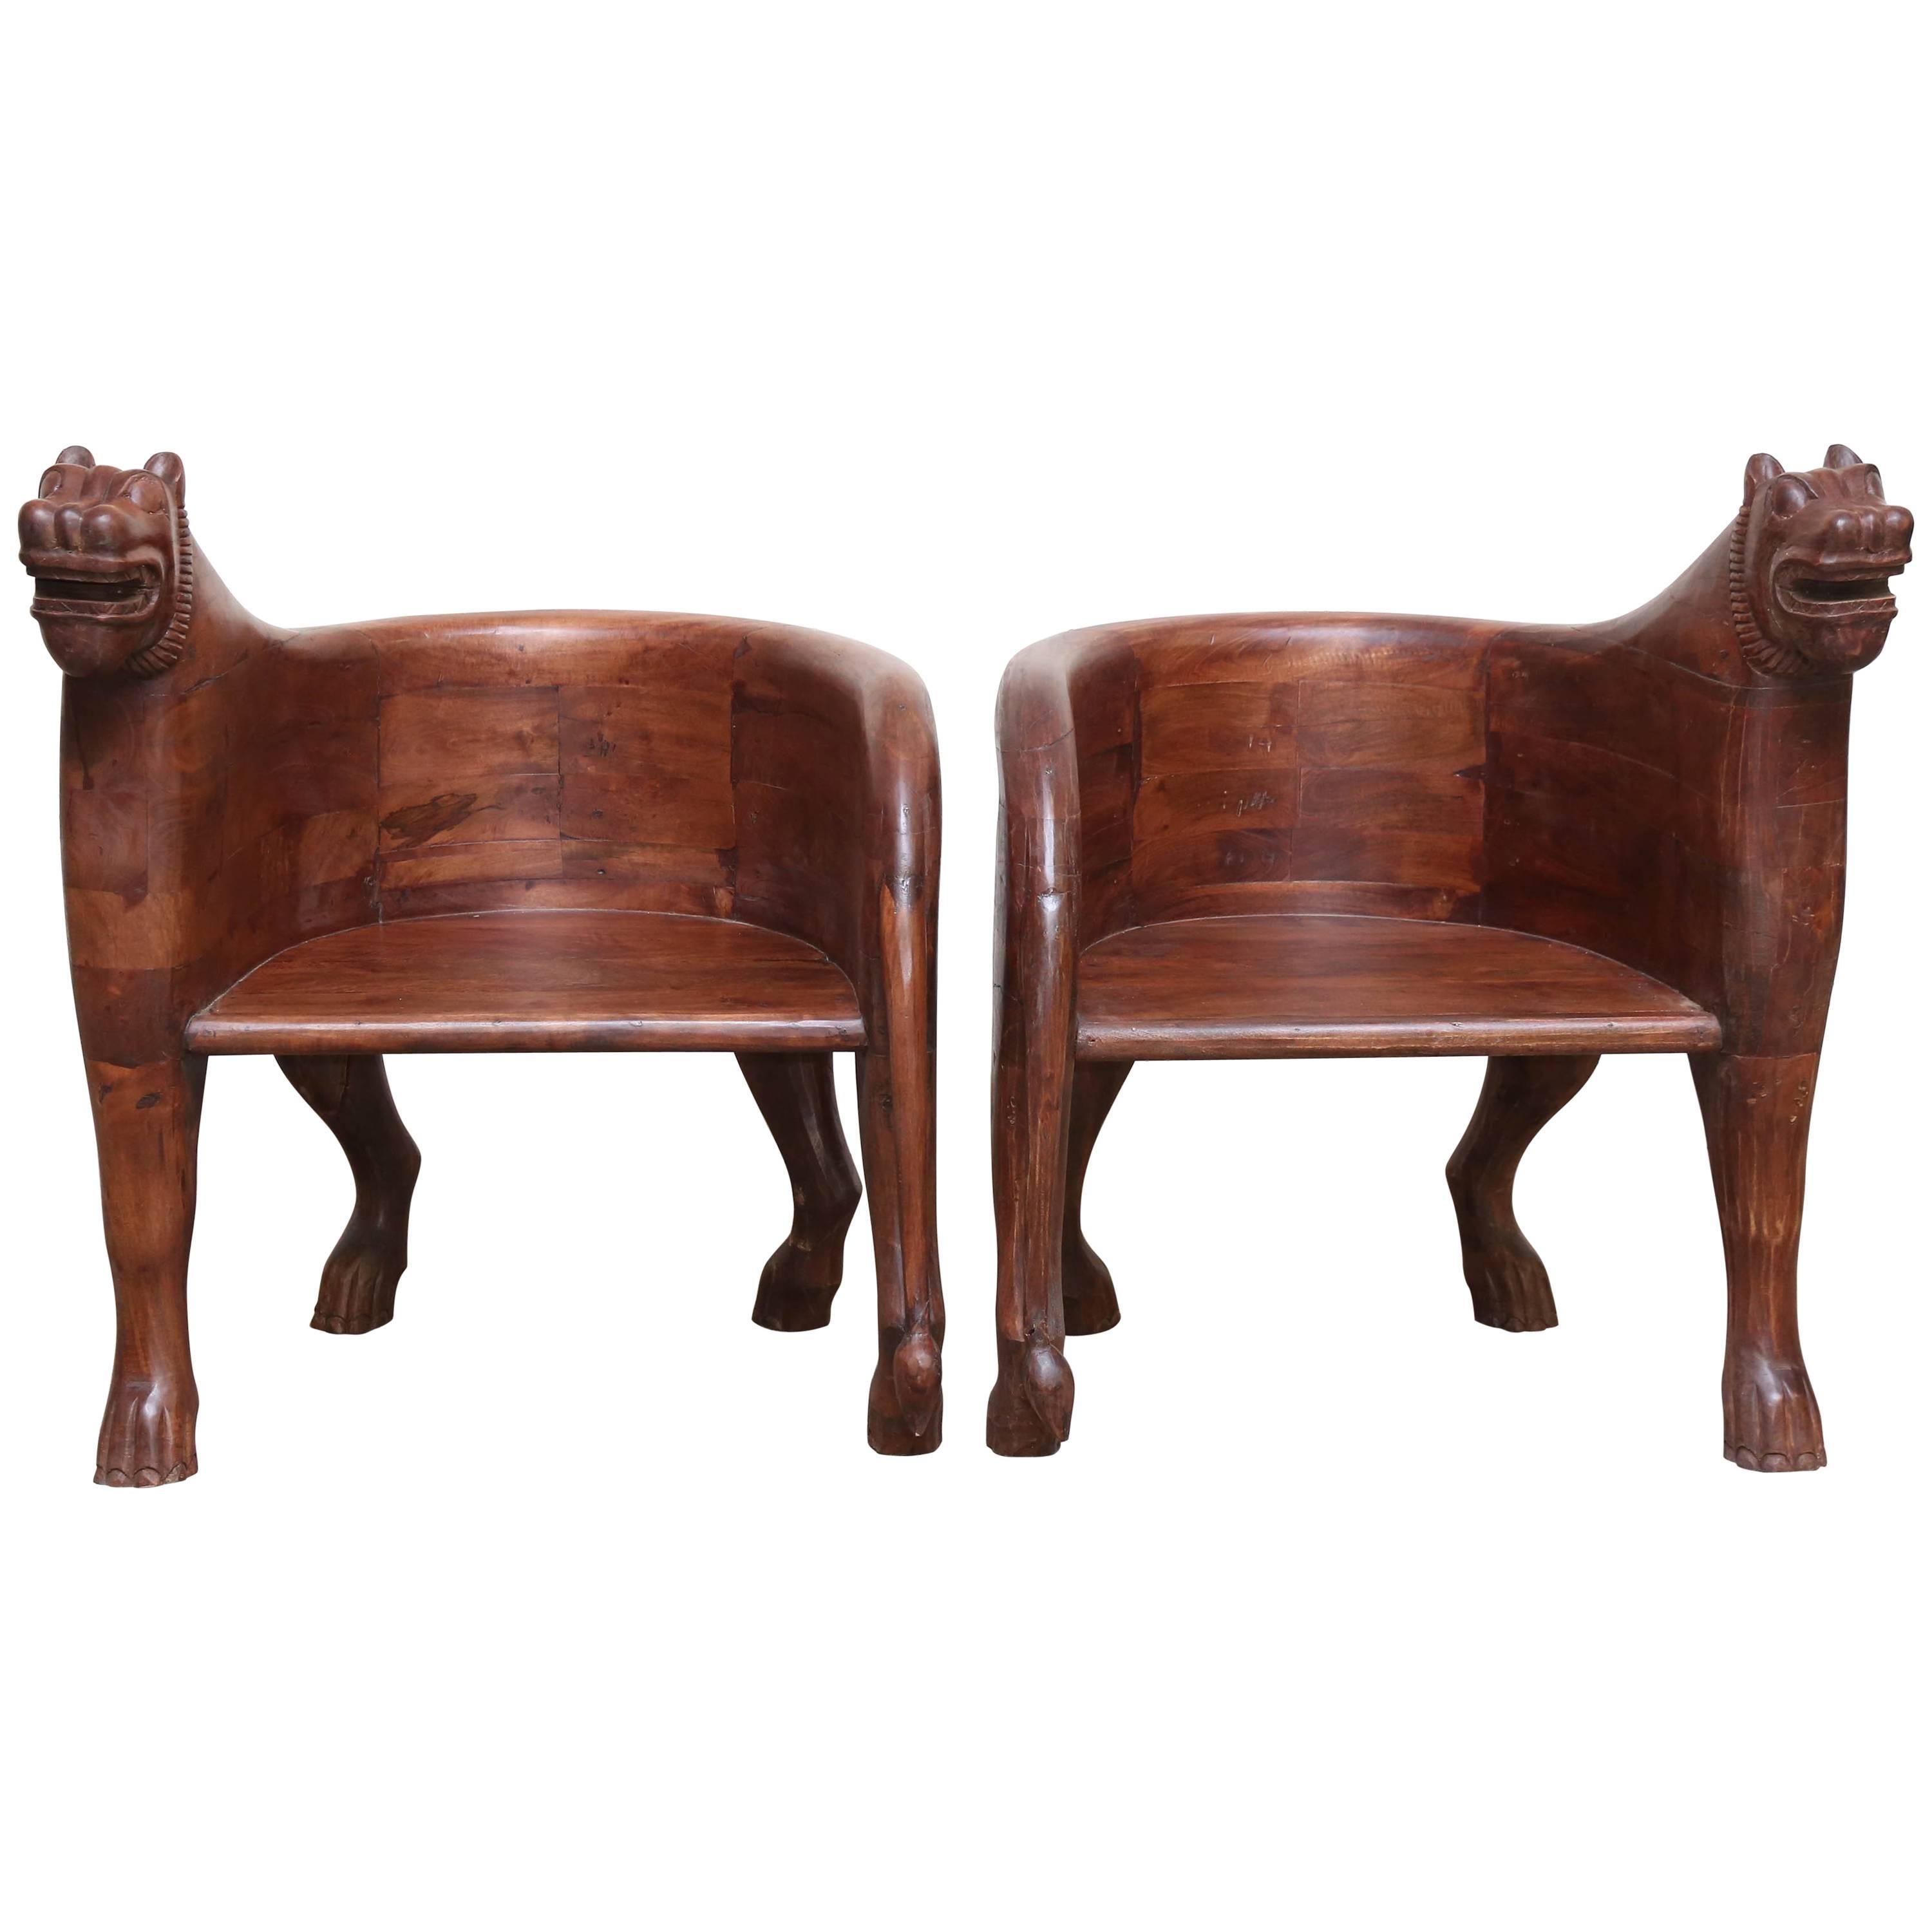 Pair of Midcentury Solid Teak Wood Leopard Chairs from Hunting Lodges in India